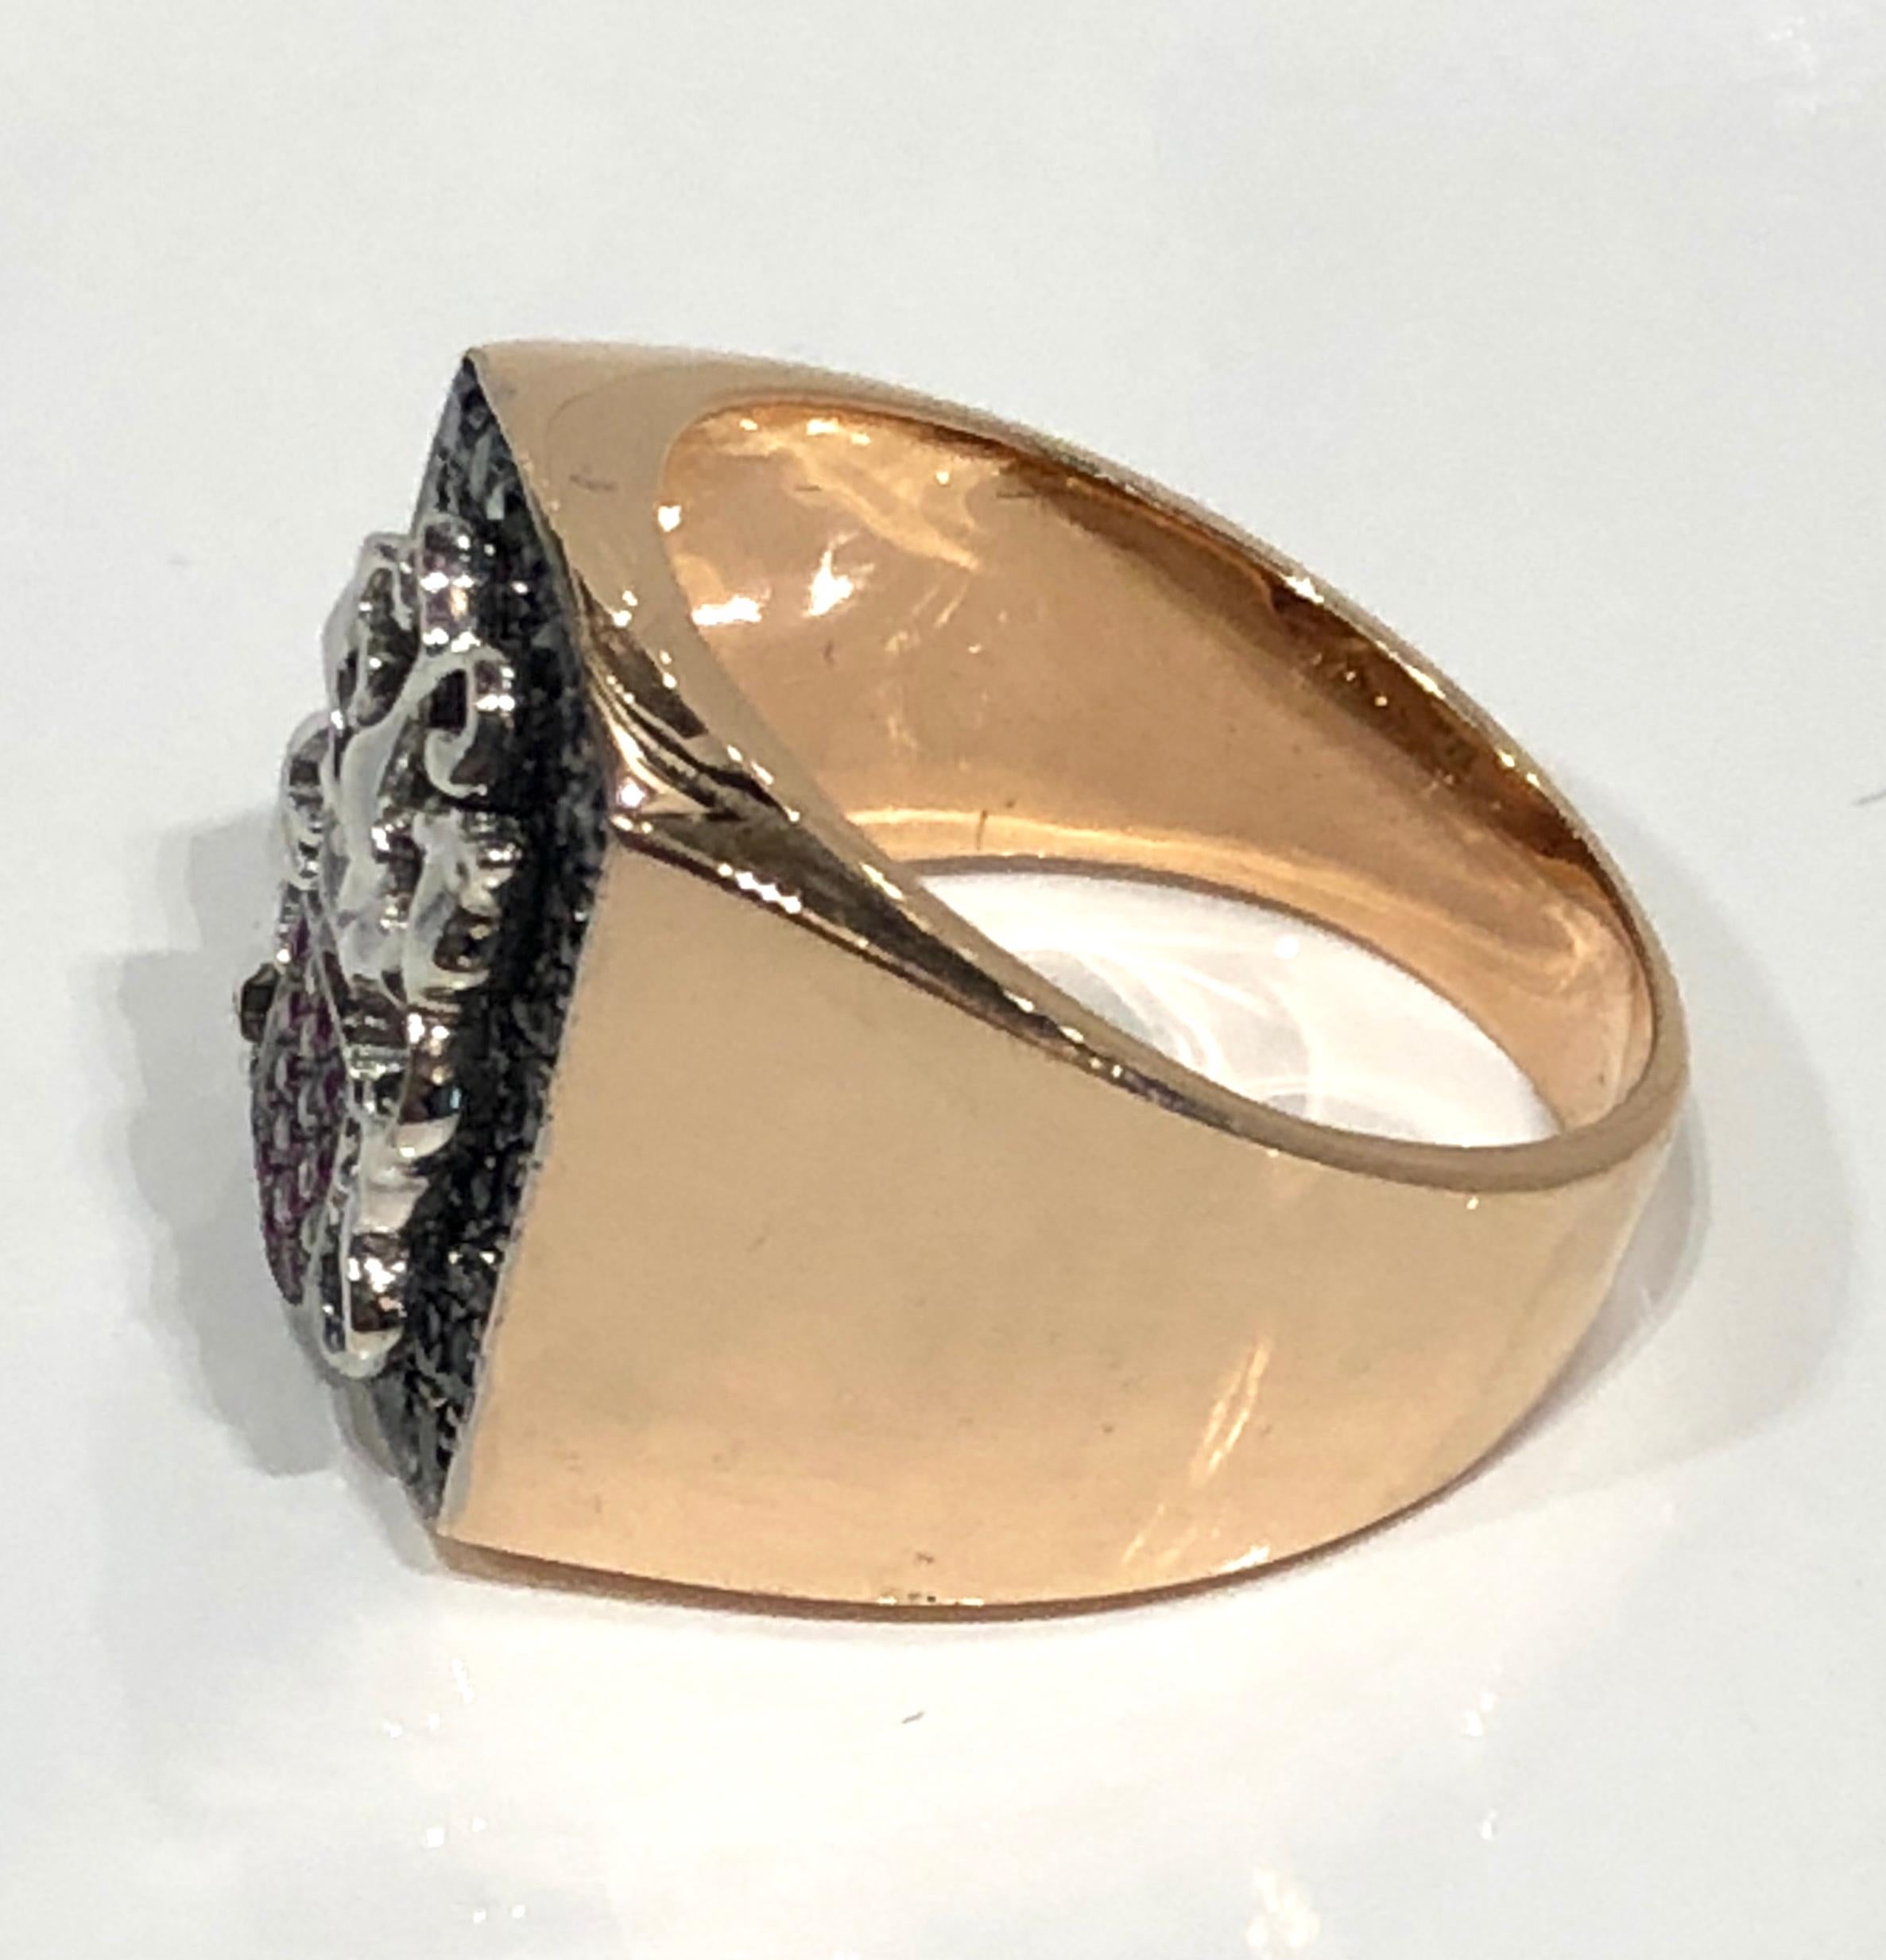 Unisex Signet Ring in 18k rose gold with black diamond pave set plateau with ruby and diamond shield detail 
Designed by Martyn Lawrence Bullard.
Available in any size, lead time 4 weeks